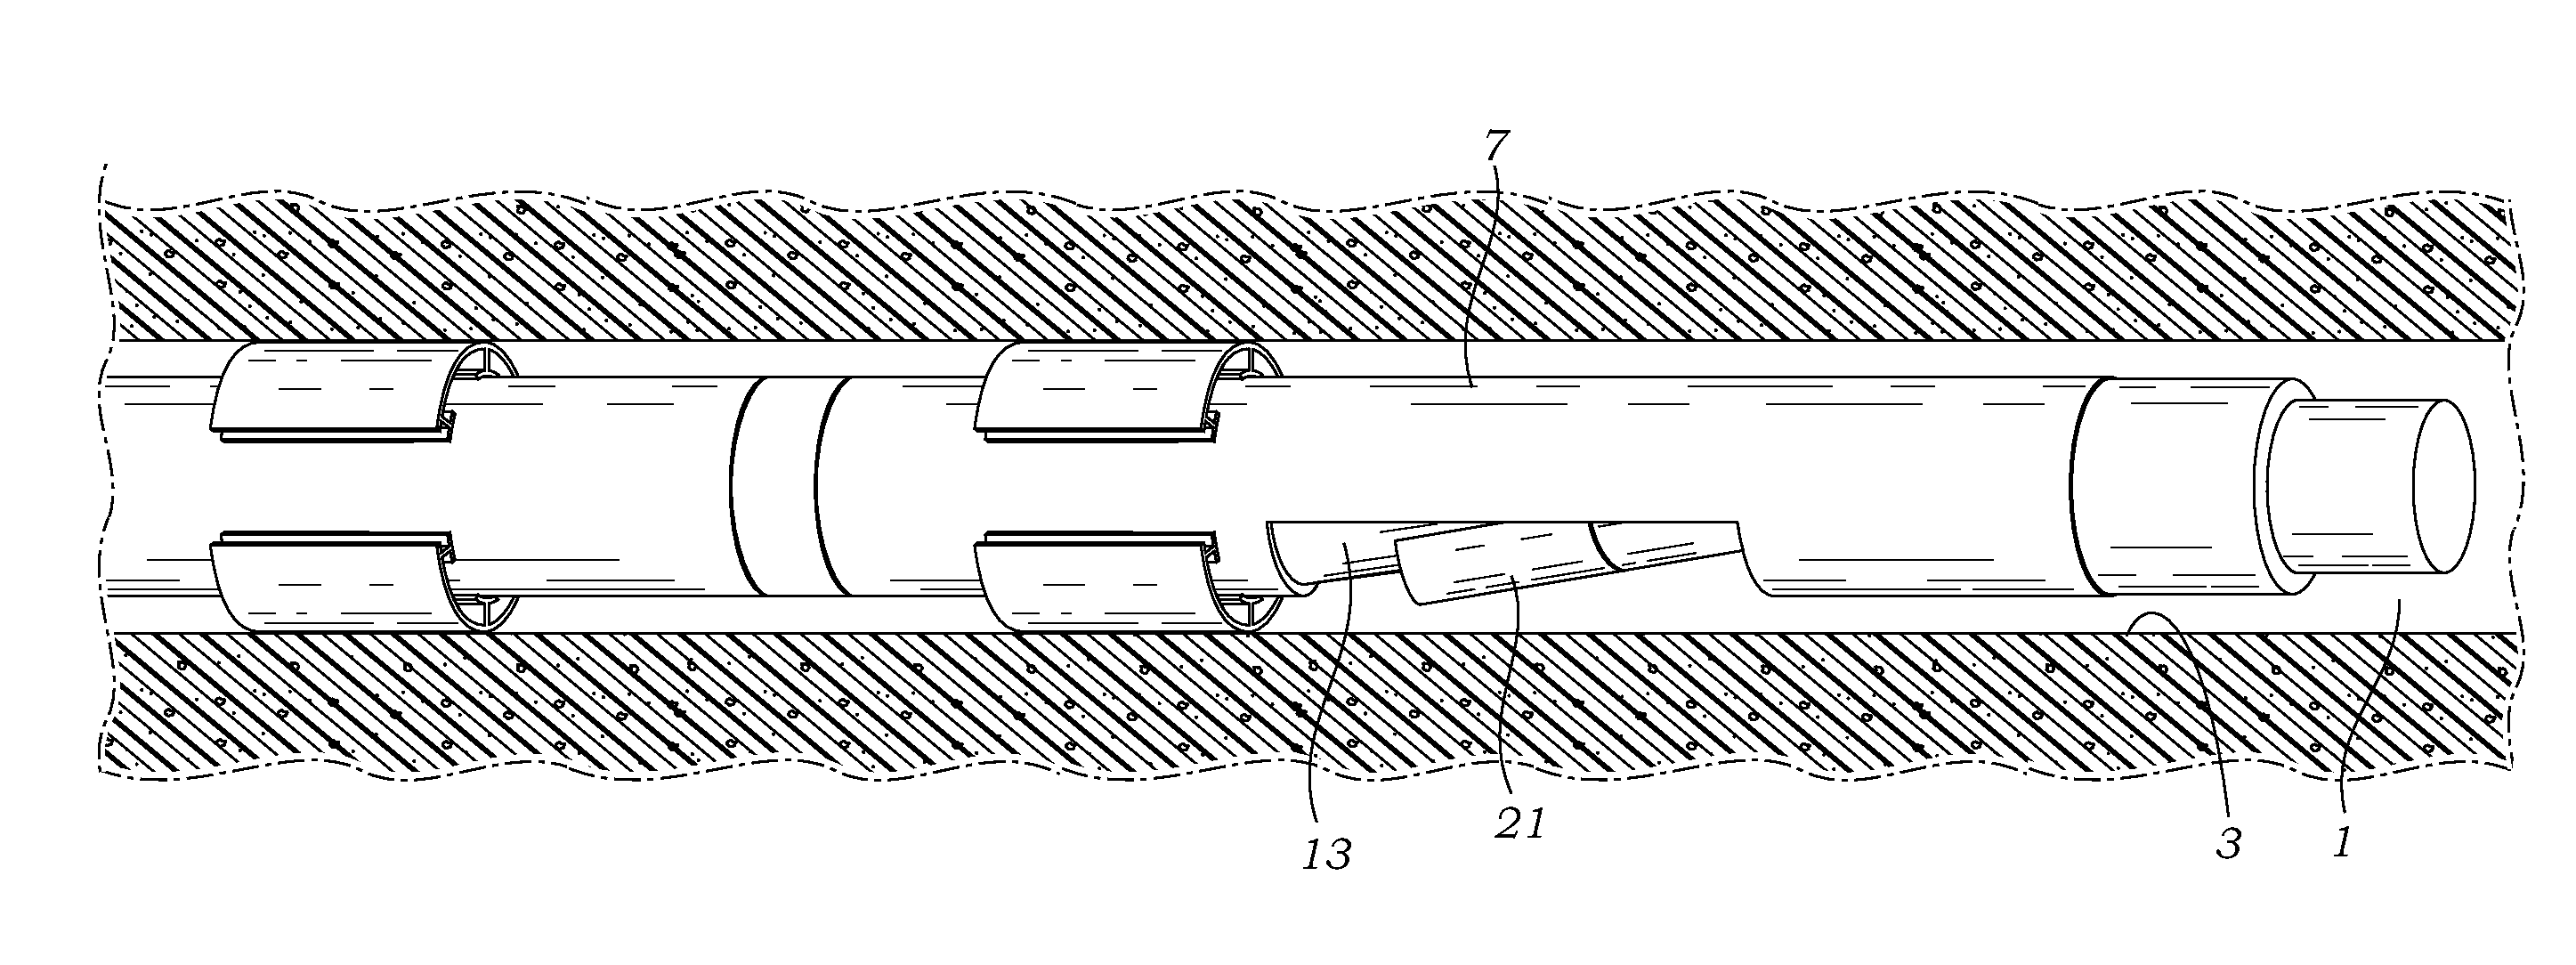 Method and devices for centralizing a casing